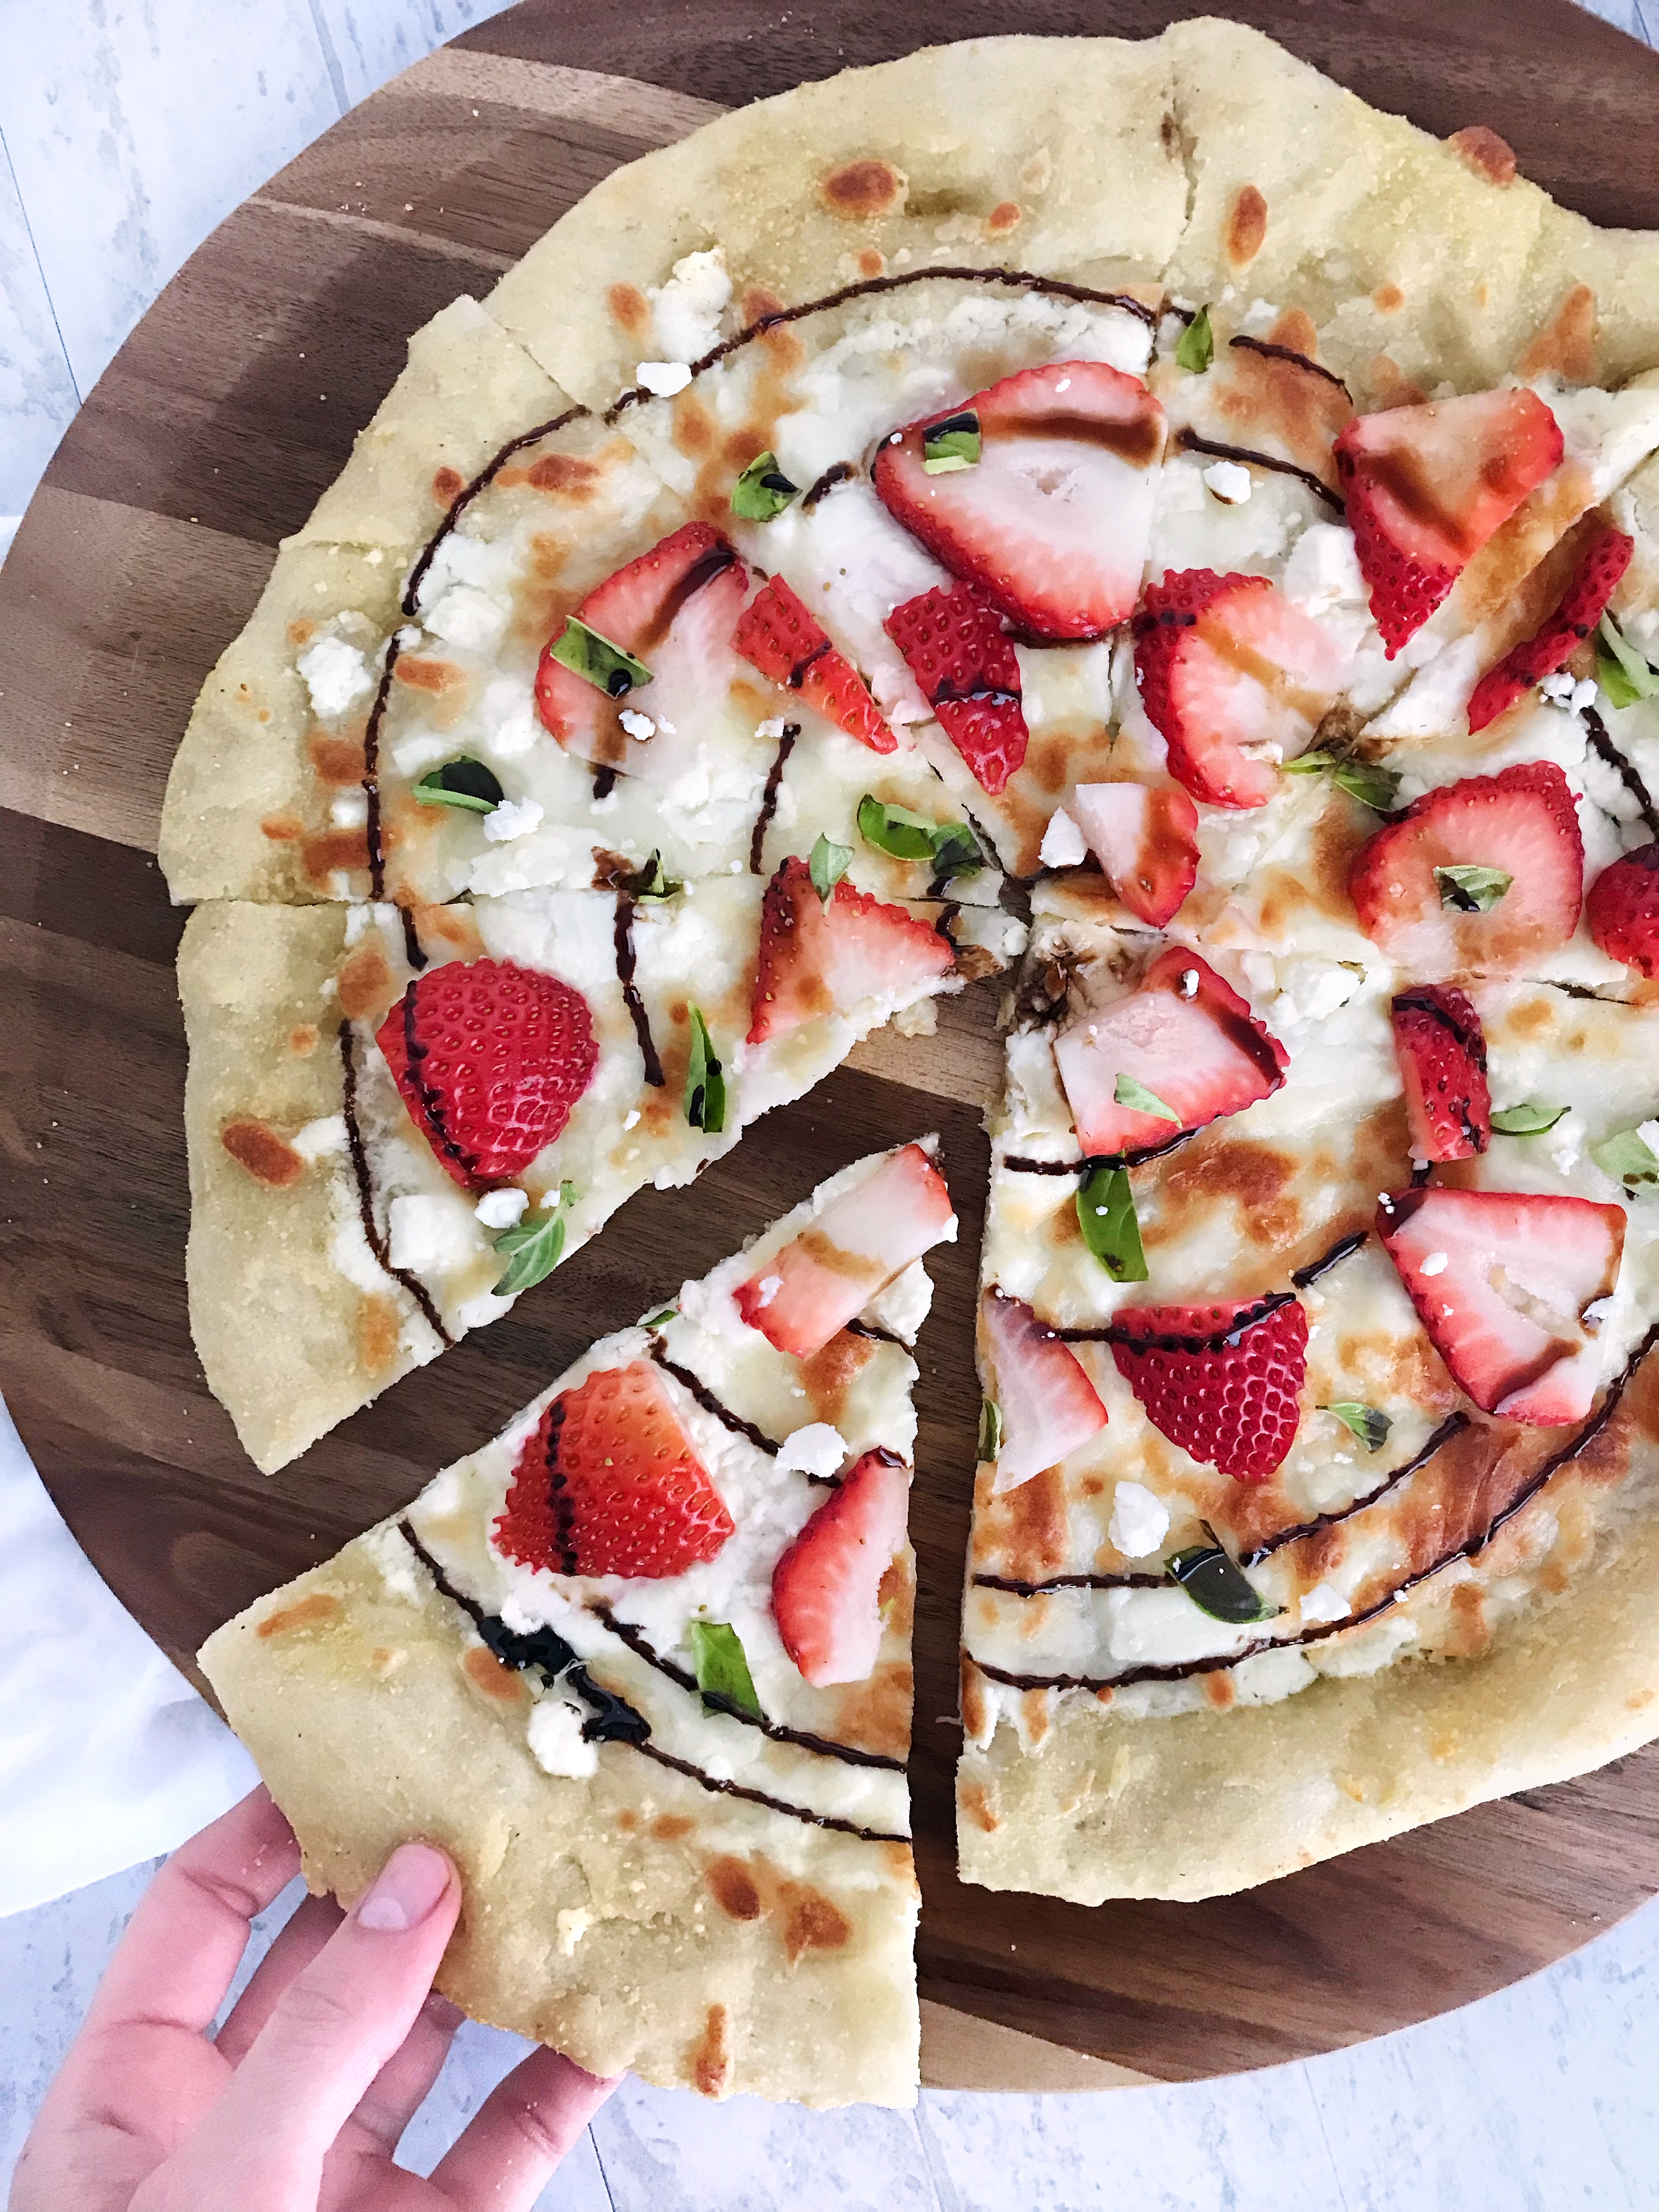 Strawberry balsamic pizza with hand grabbing a slice